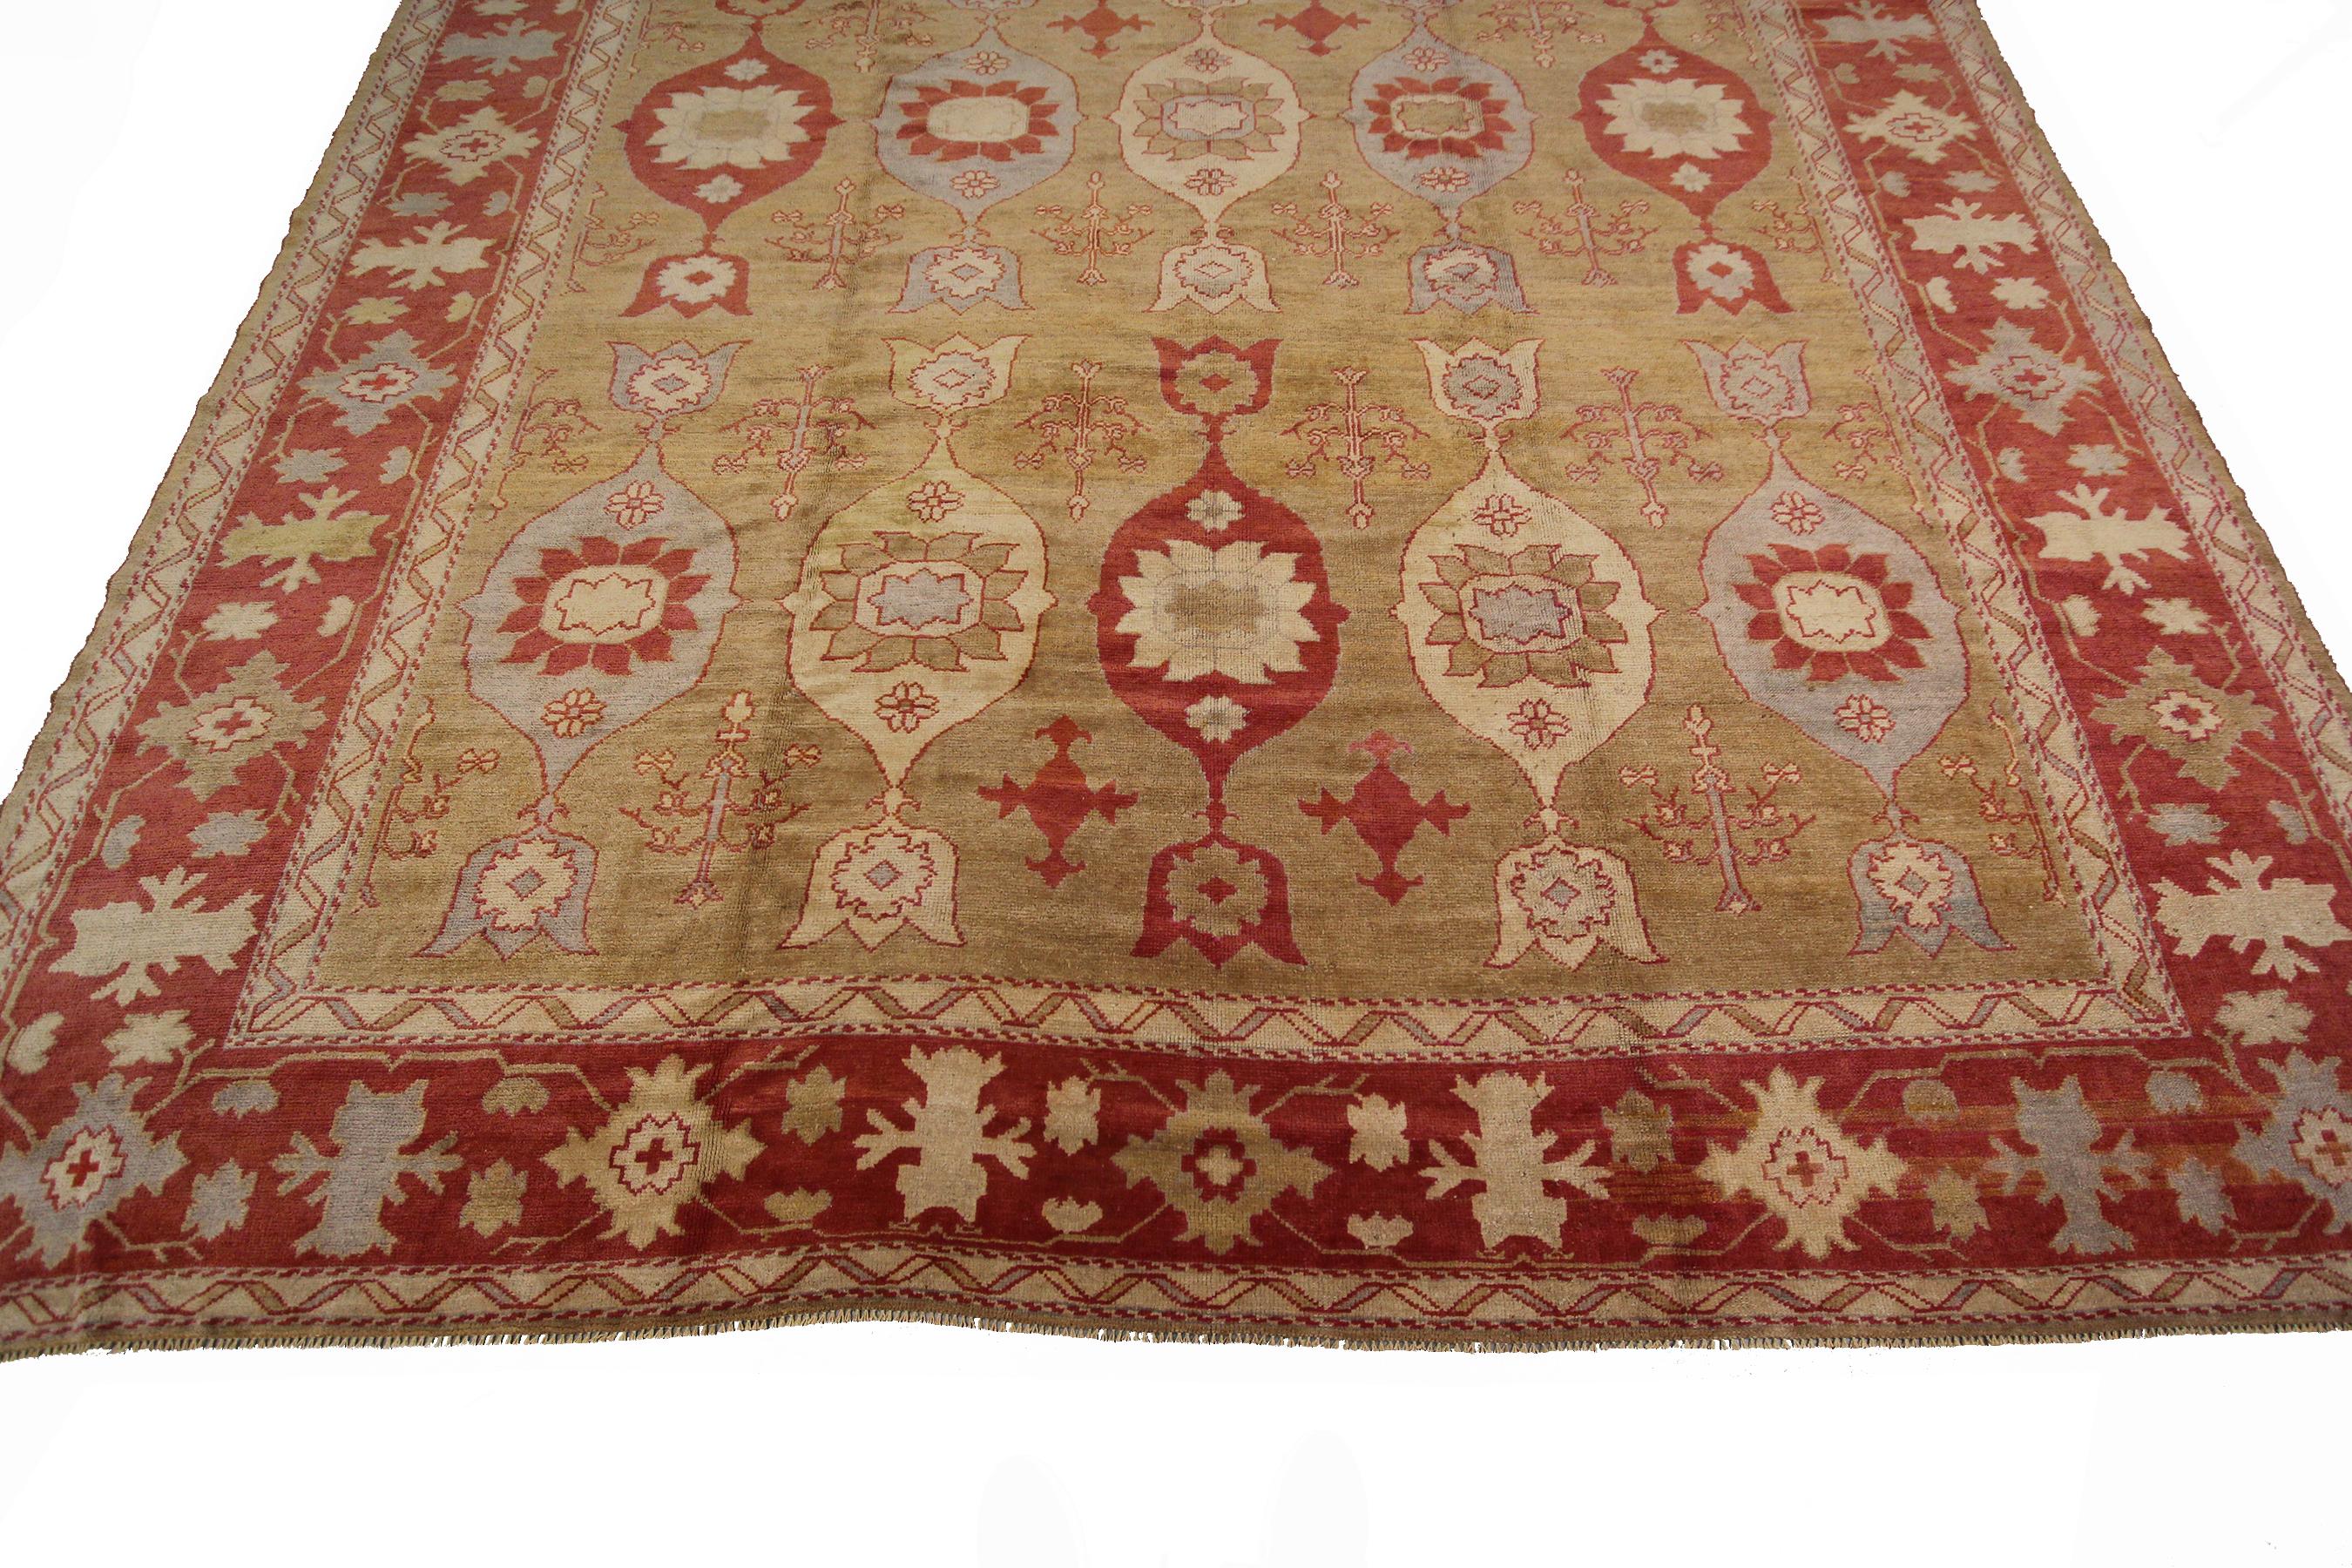 Vintage Turkish Oushak Rug Geometric Art Nouveau Rug Handmade 12x15 361x463CM In Good Condition For Sale In New York, NY